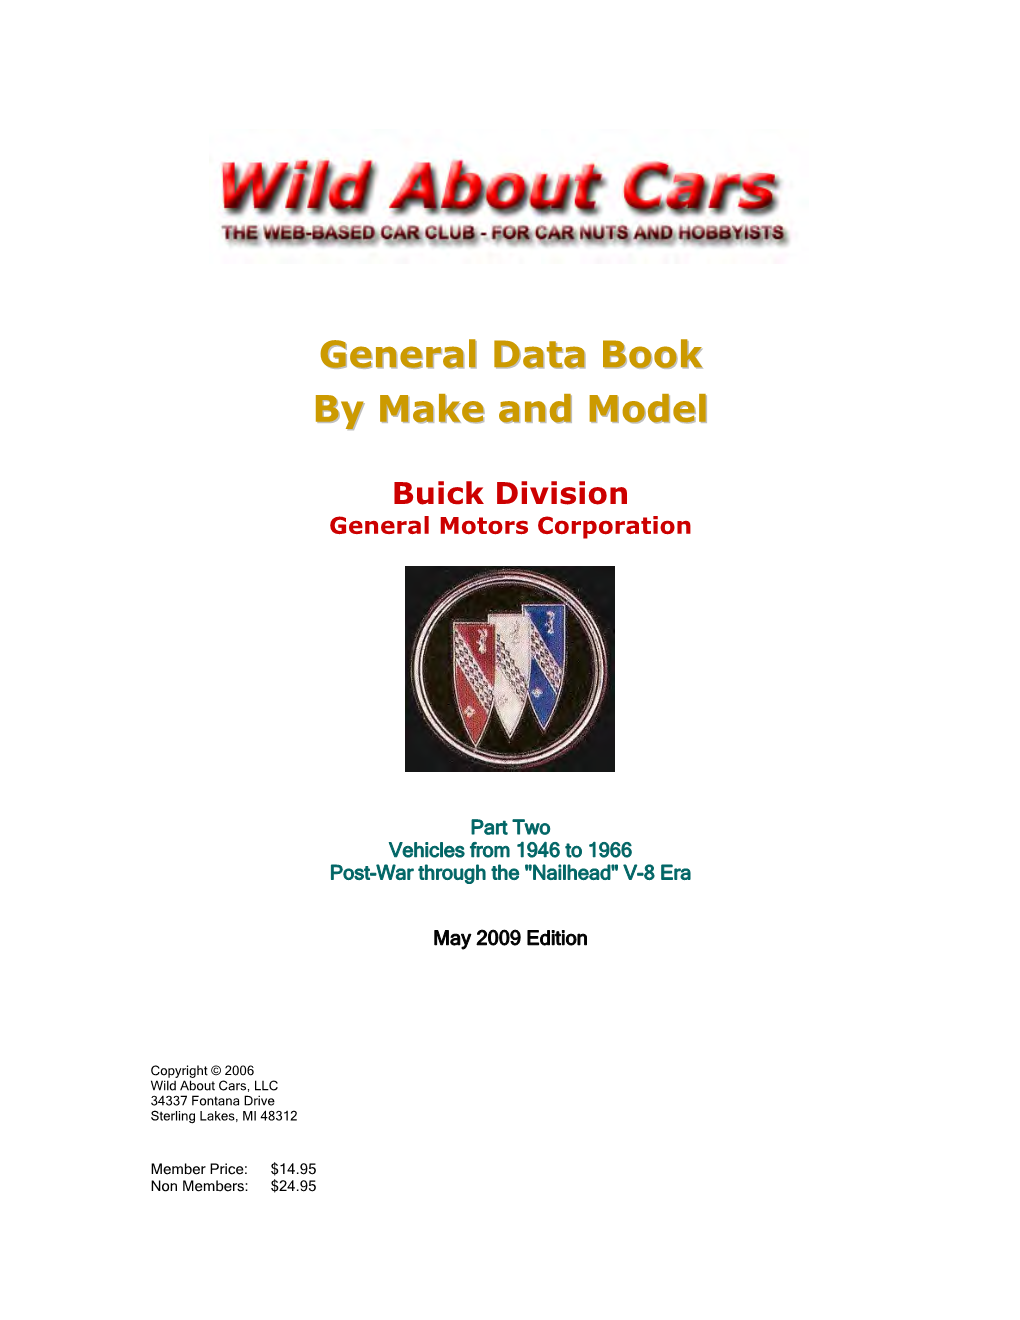 General Data Book by Make and Model